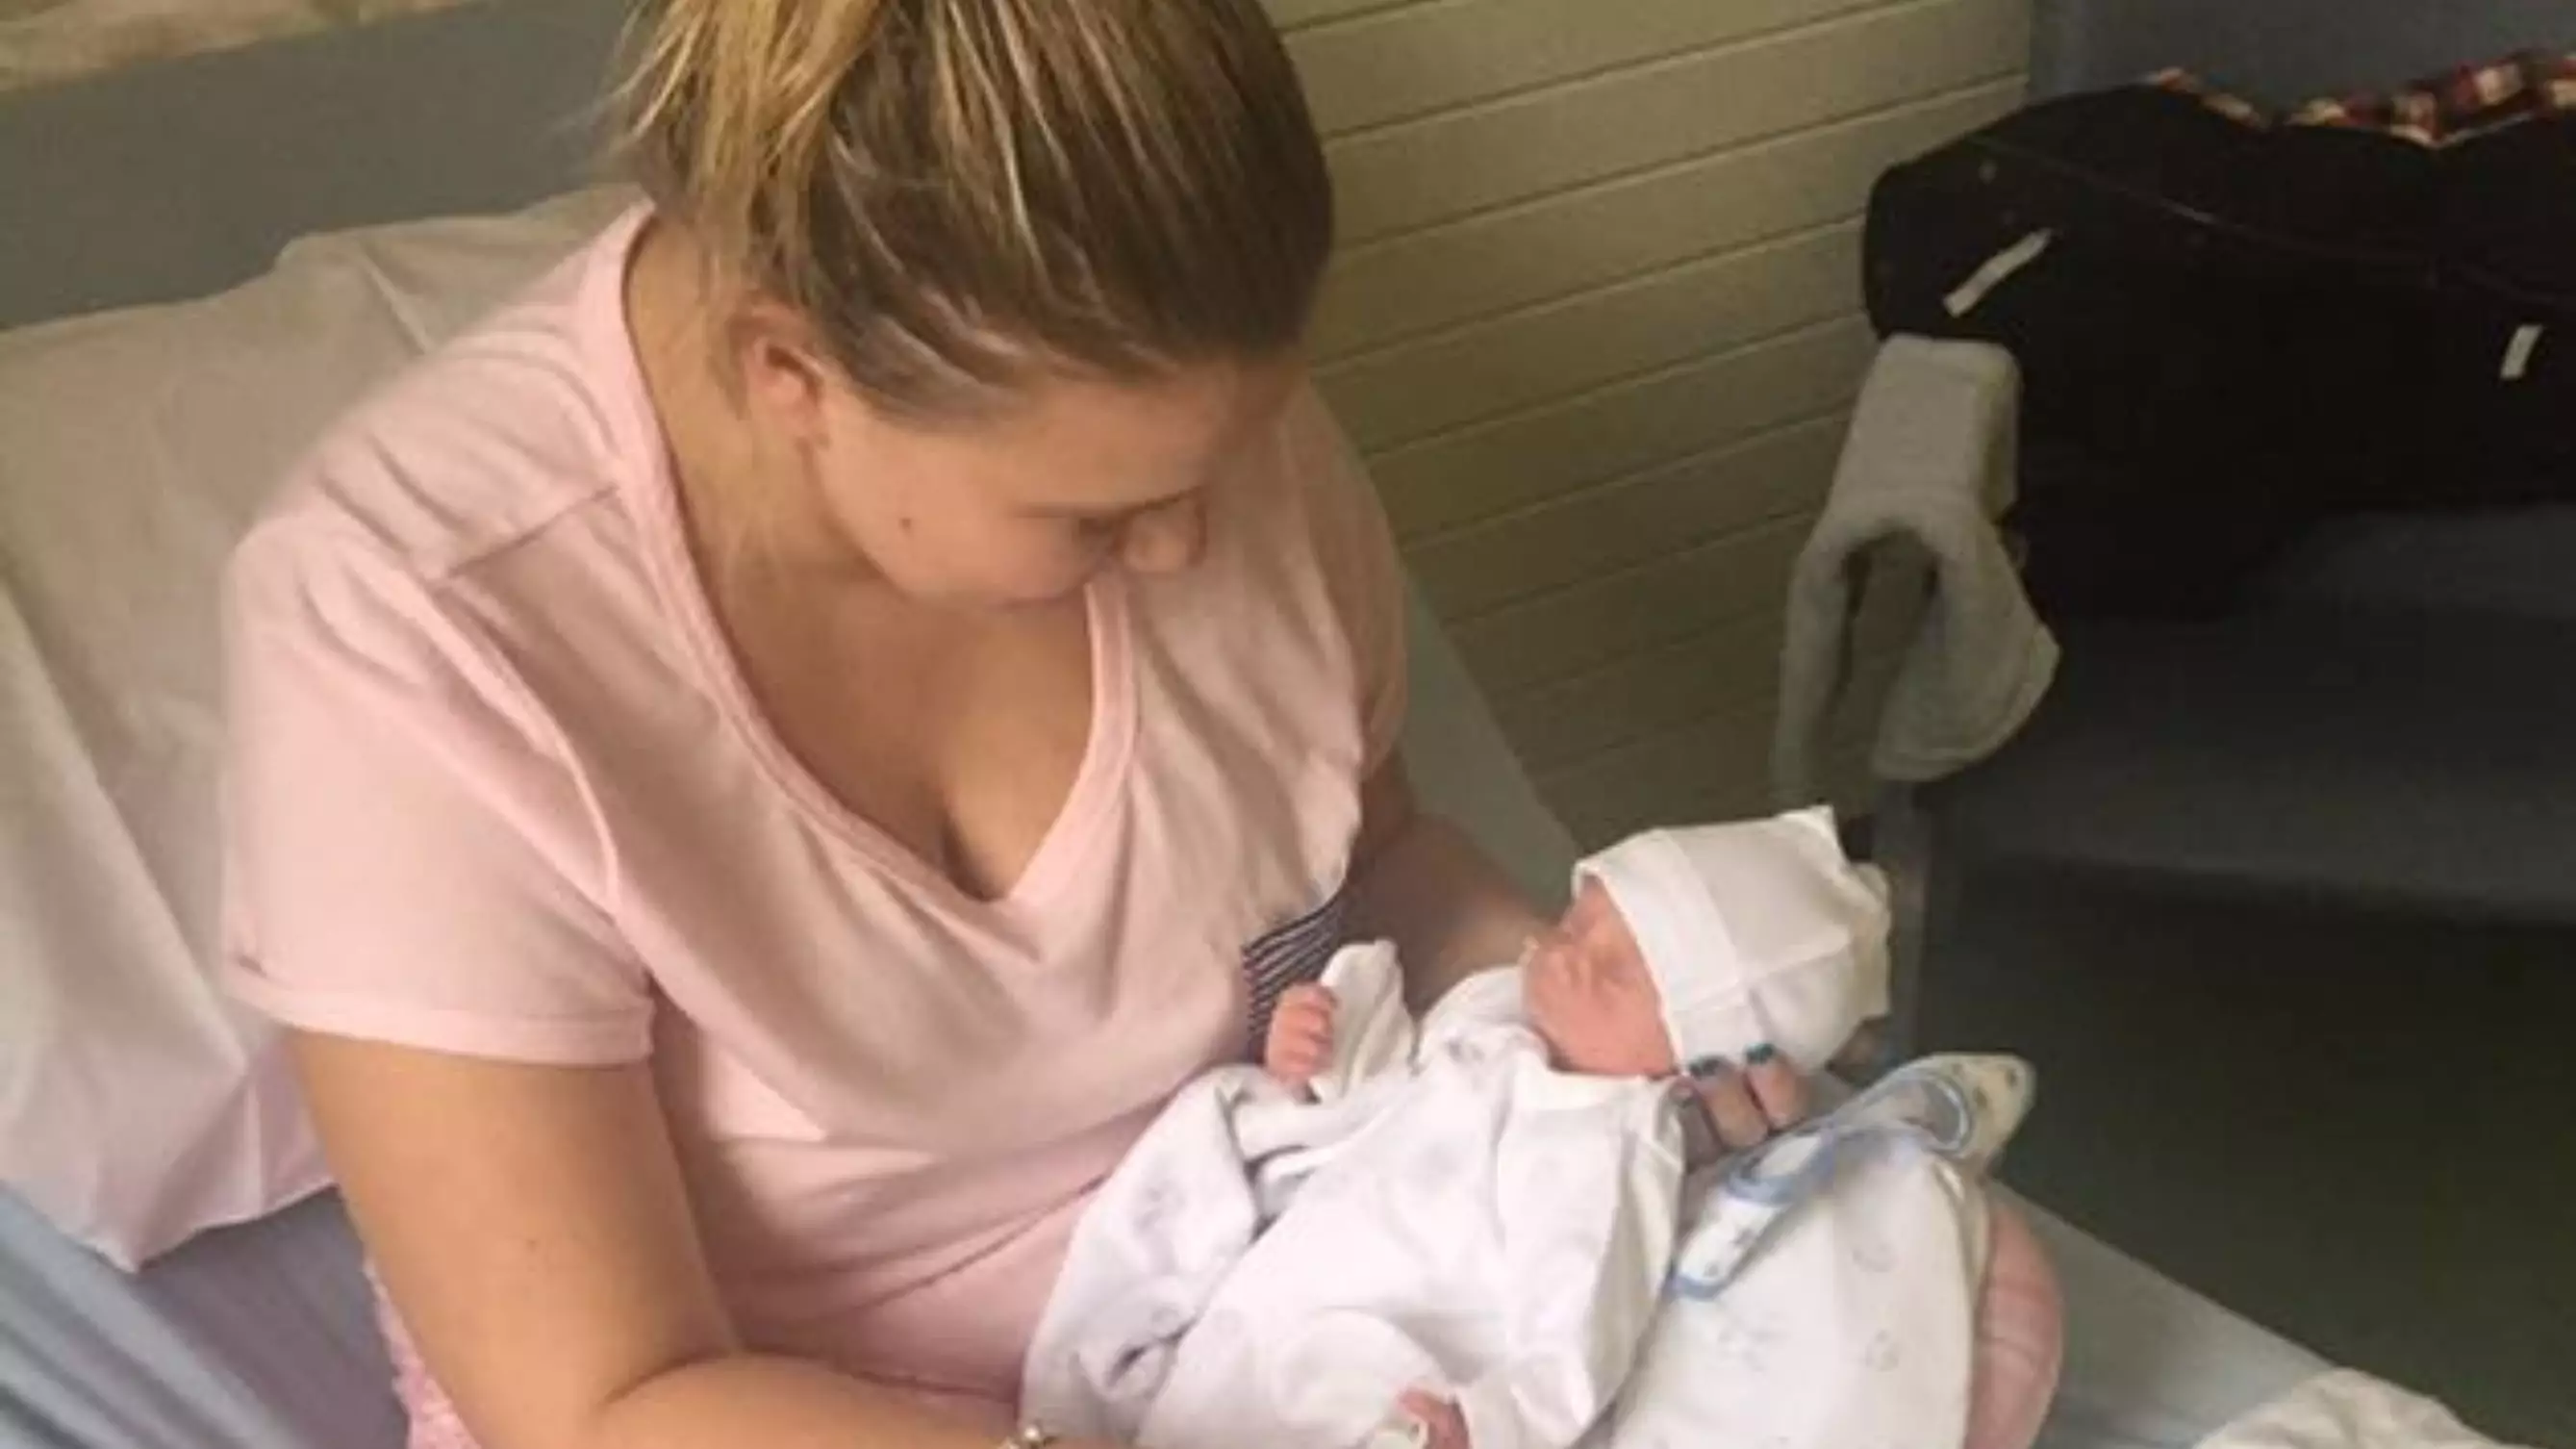 Teenager Rushed To Hospital With 'Appendicitis' Gives Birth To Surprise Baby